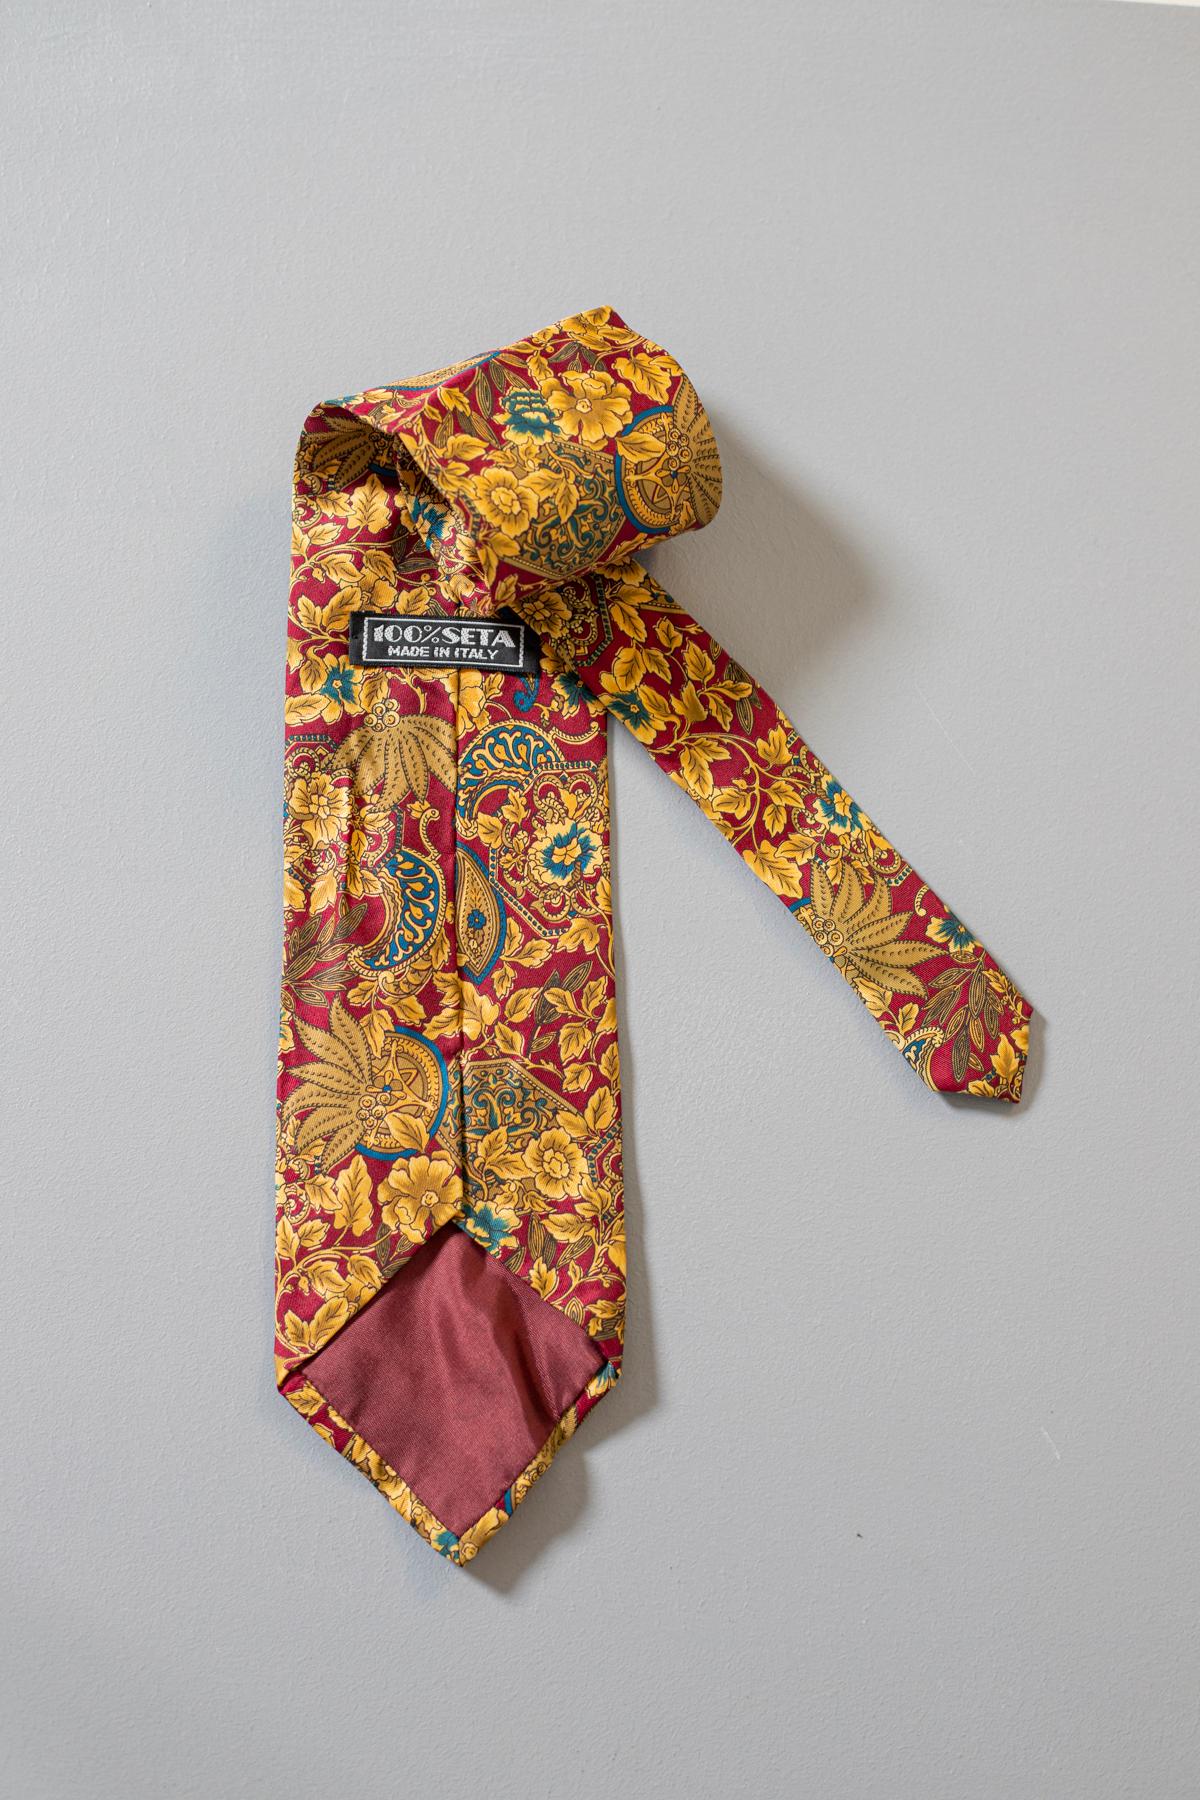 Multicolored, eccentric and elegant, this tie is of Italian manufacture, it is made of 100% silk. A true evergreen, this tie is timeless, decorated with gold paisley motifs with a few blue details on a red background. It is the perfect tie to make